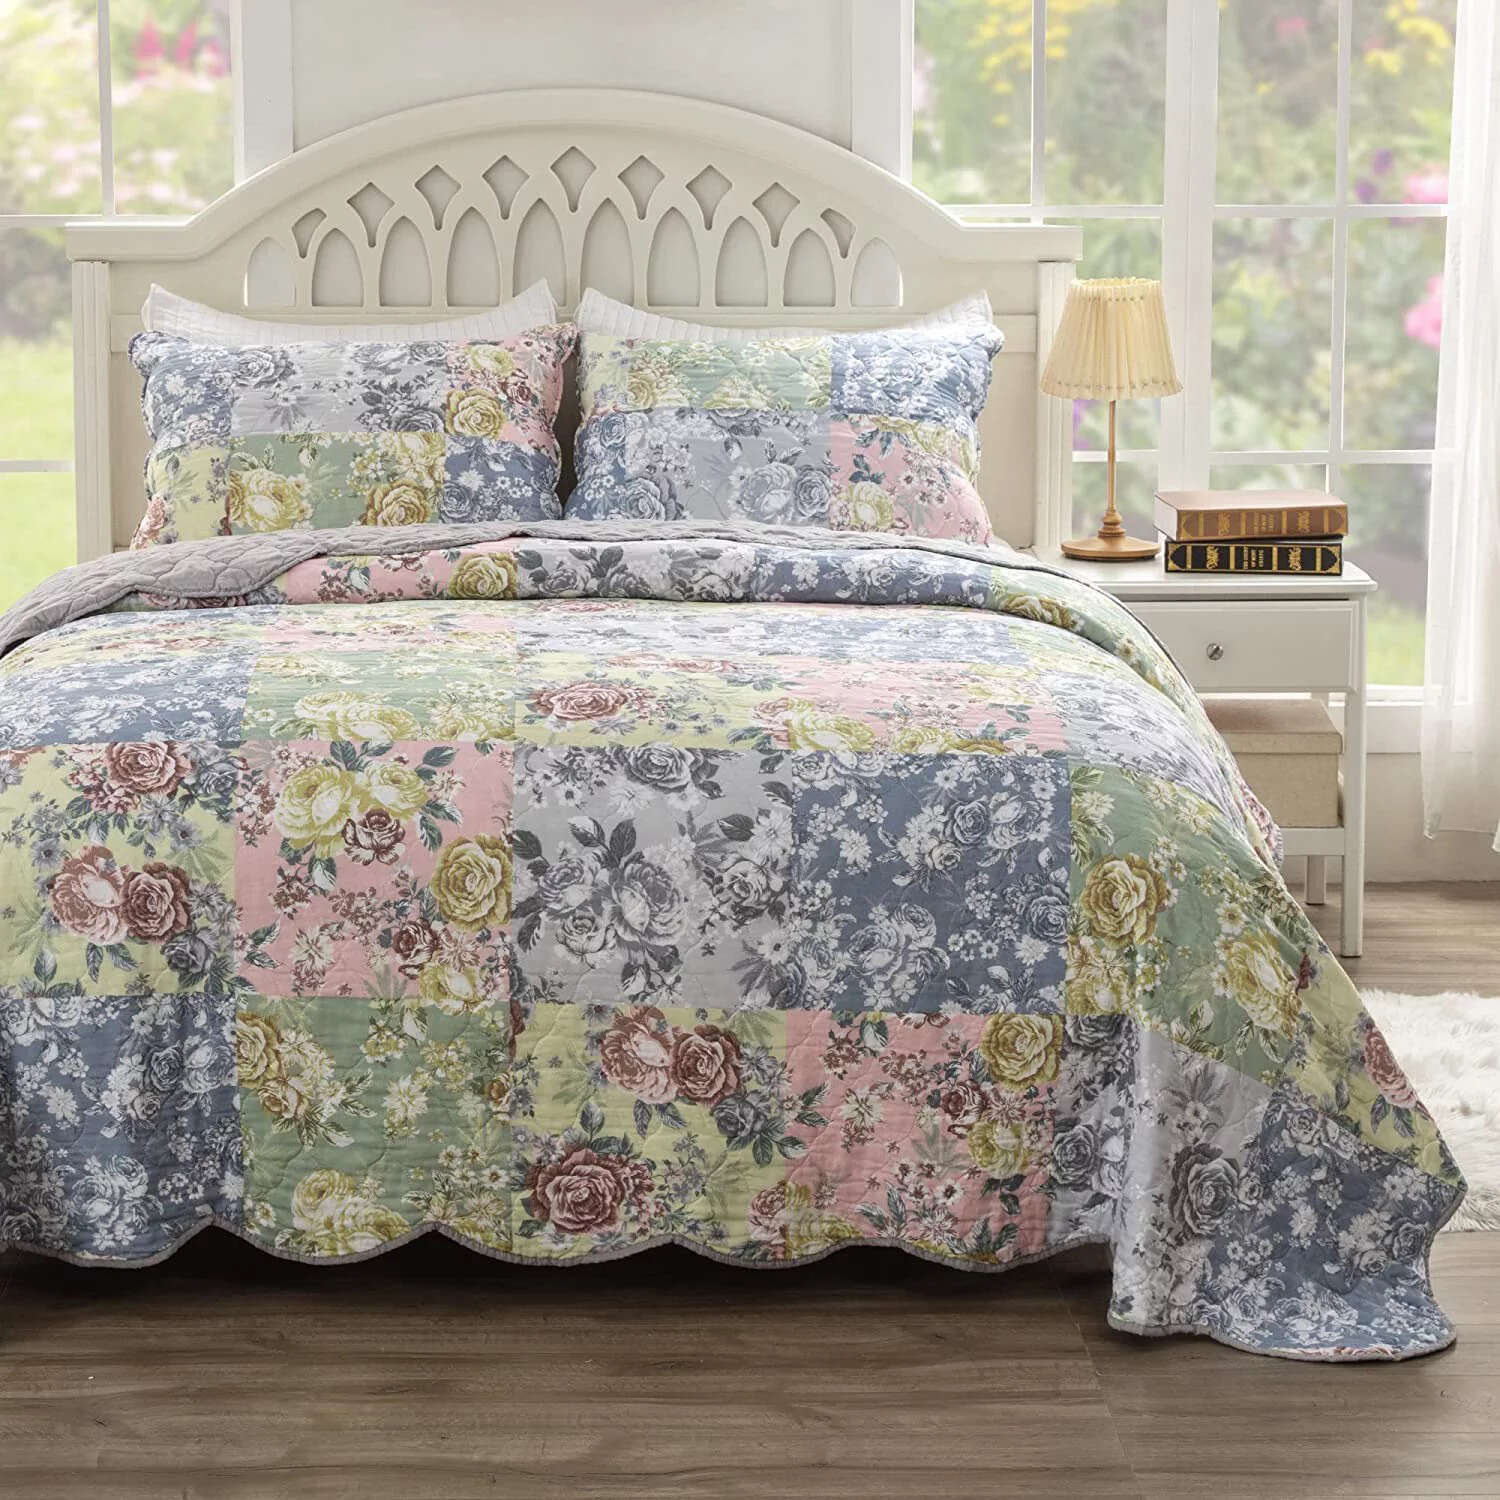 15 Incredible Quilt Queen Size For 2023 1697515143 